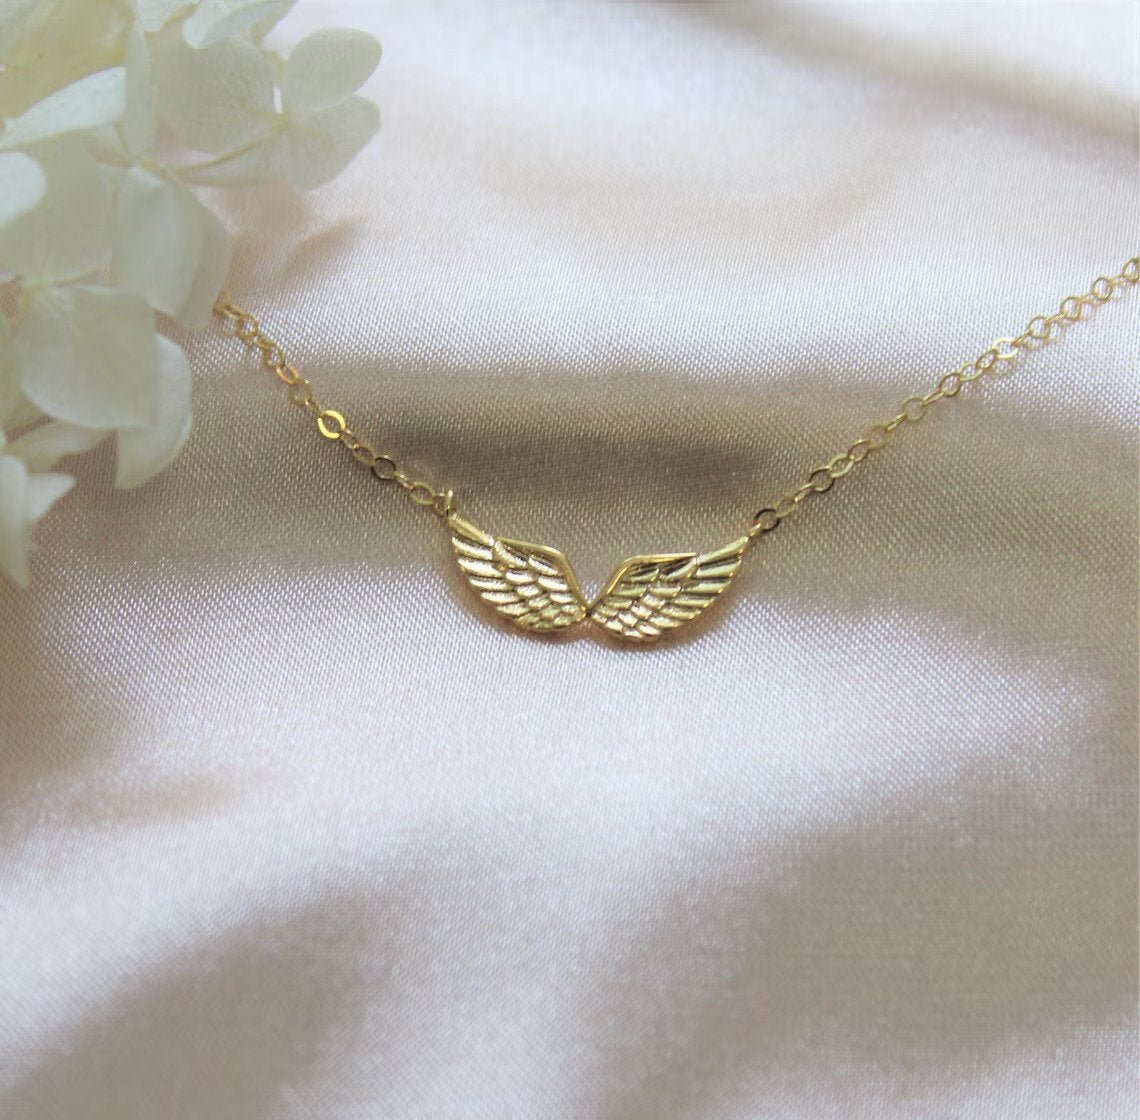 Double angel wing necklace charm for memorial gift is laying on a plain white fabric surface.